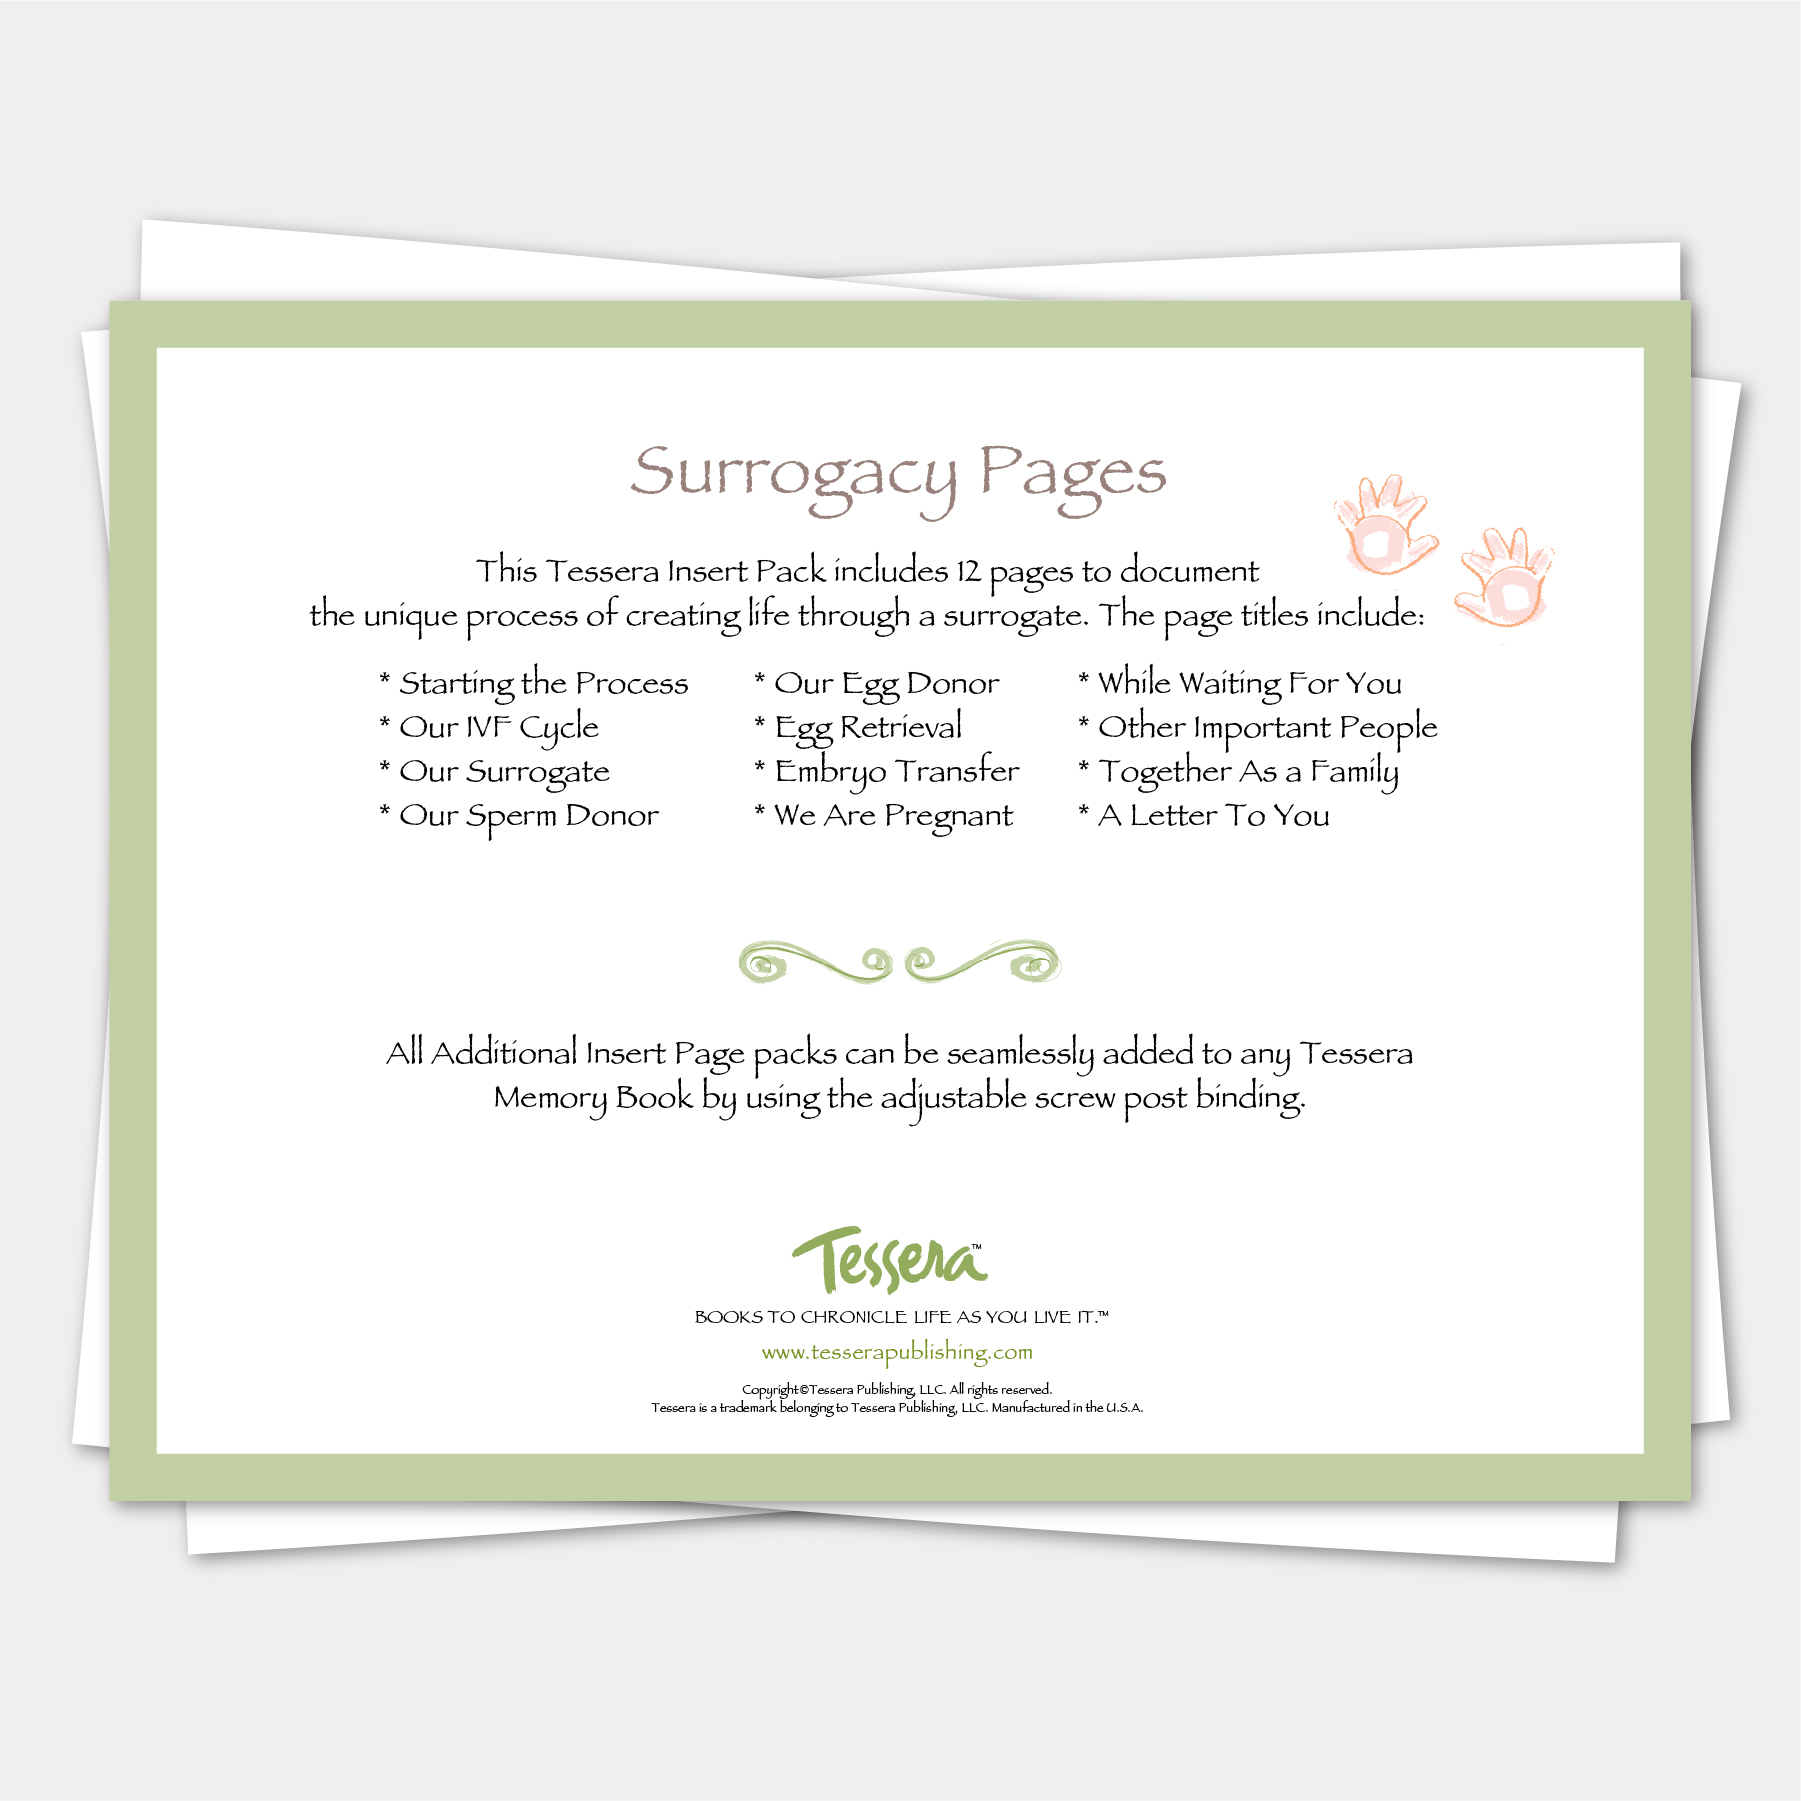 surrogacy pages additional insert pages for tessera memory books